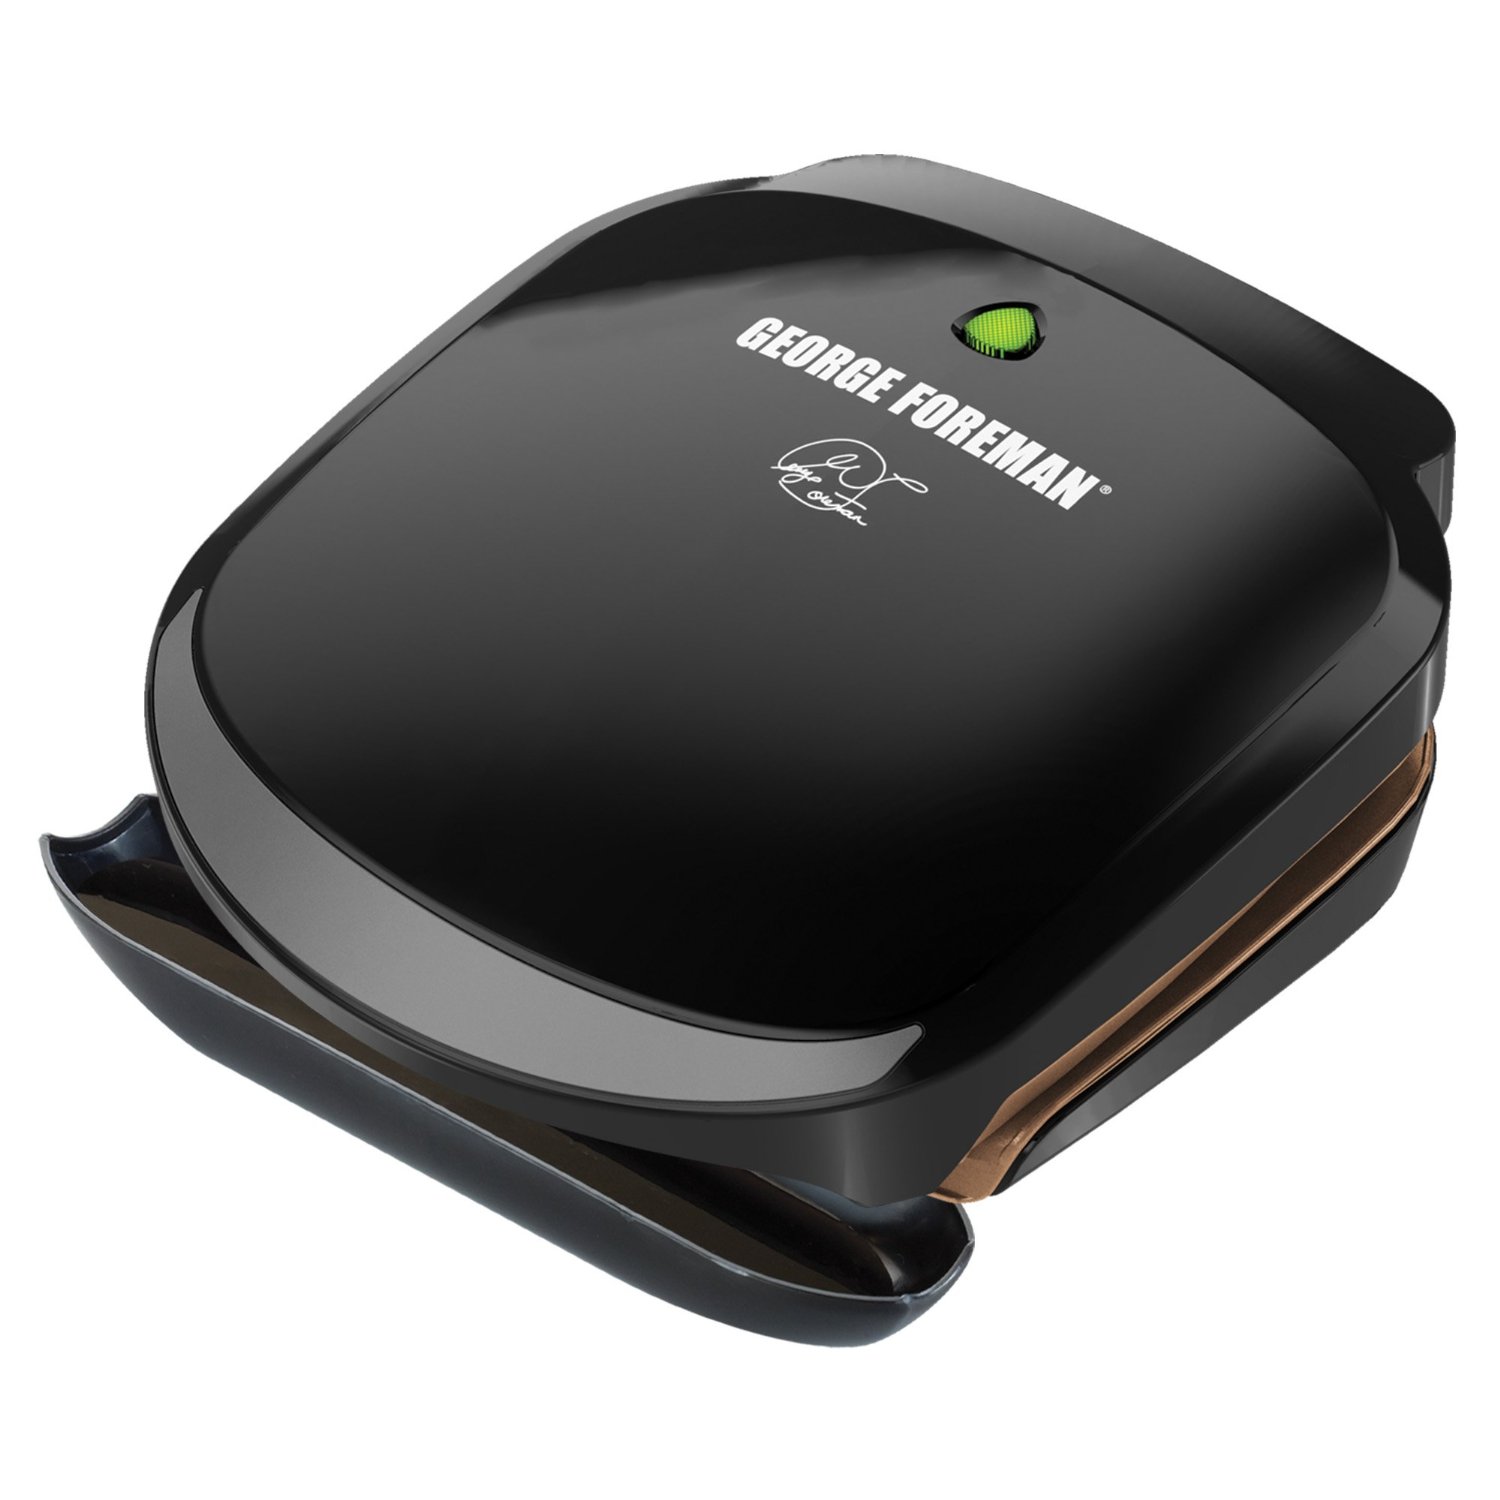 George Foreman 2-serving classic grill for $9